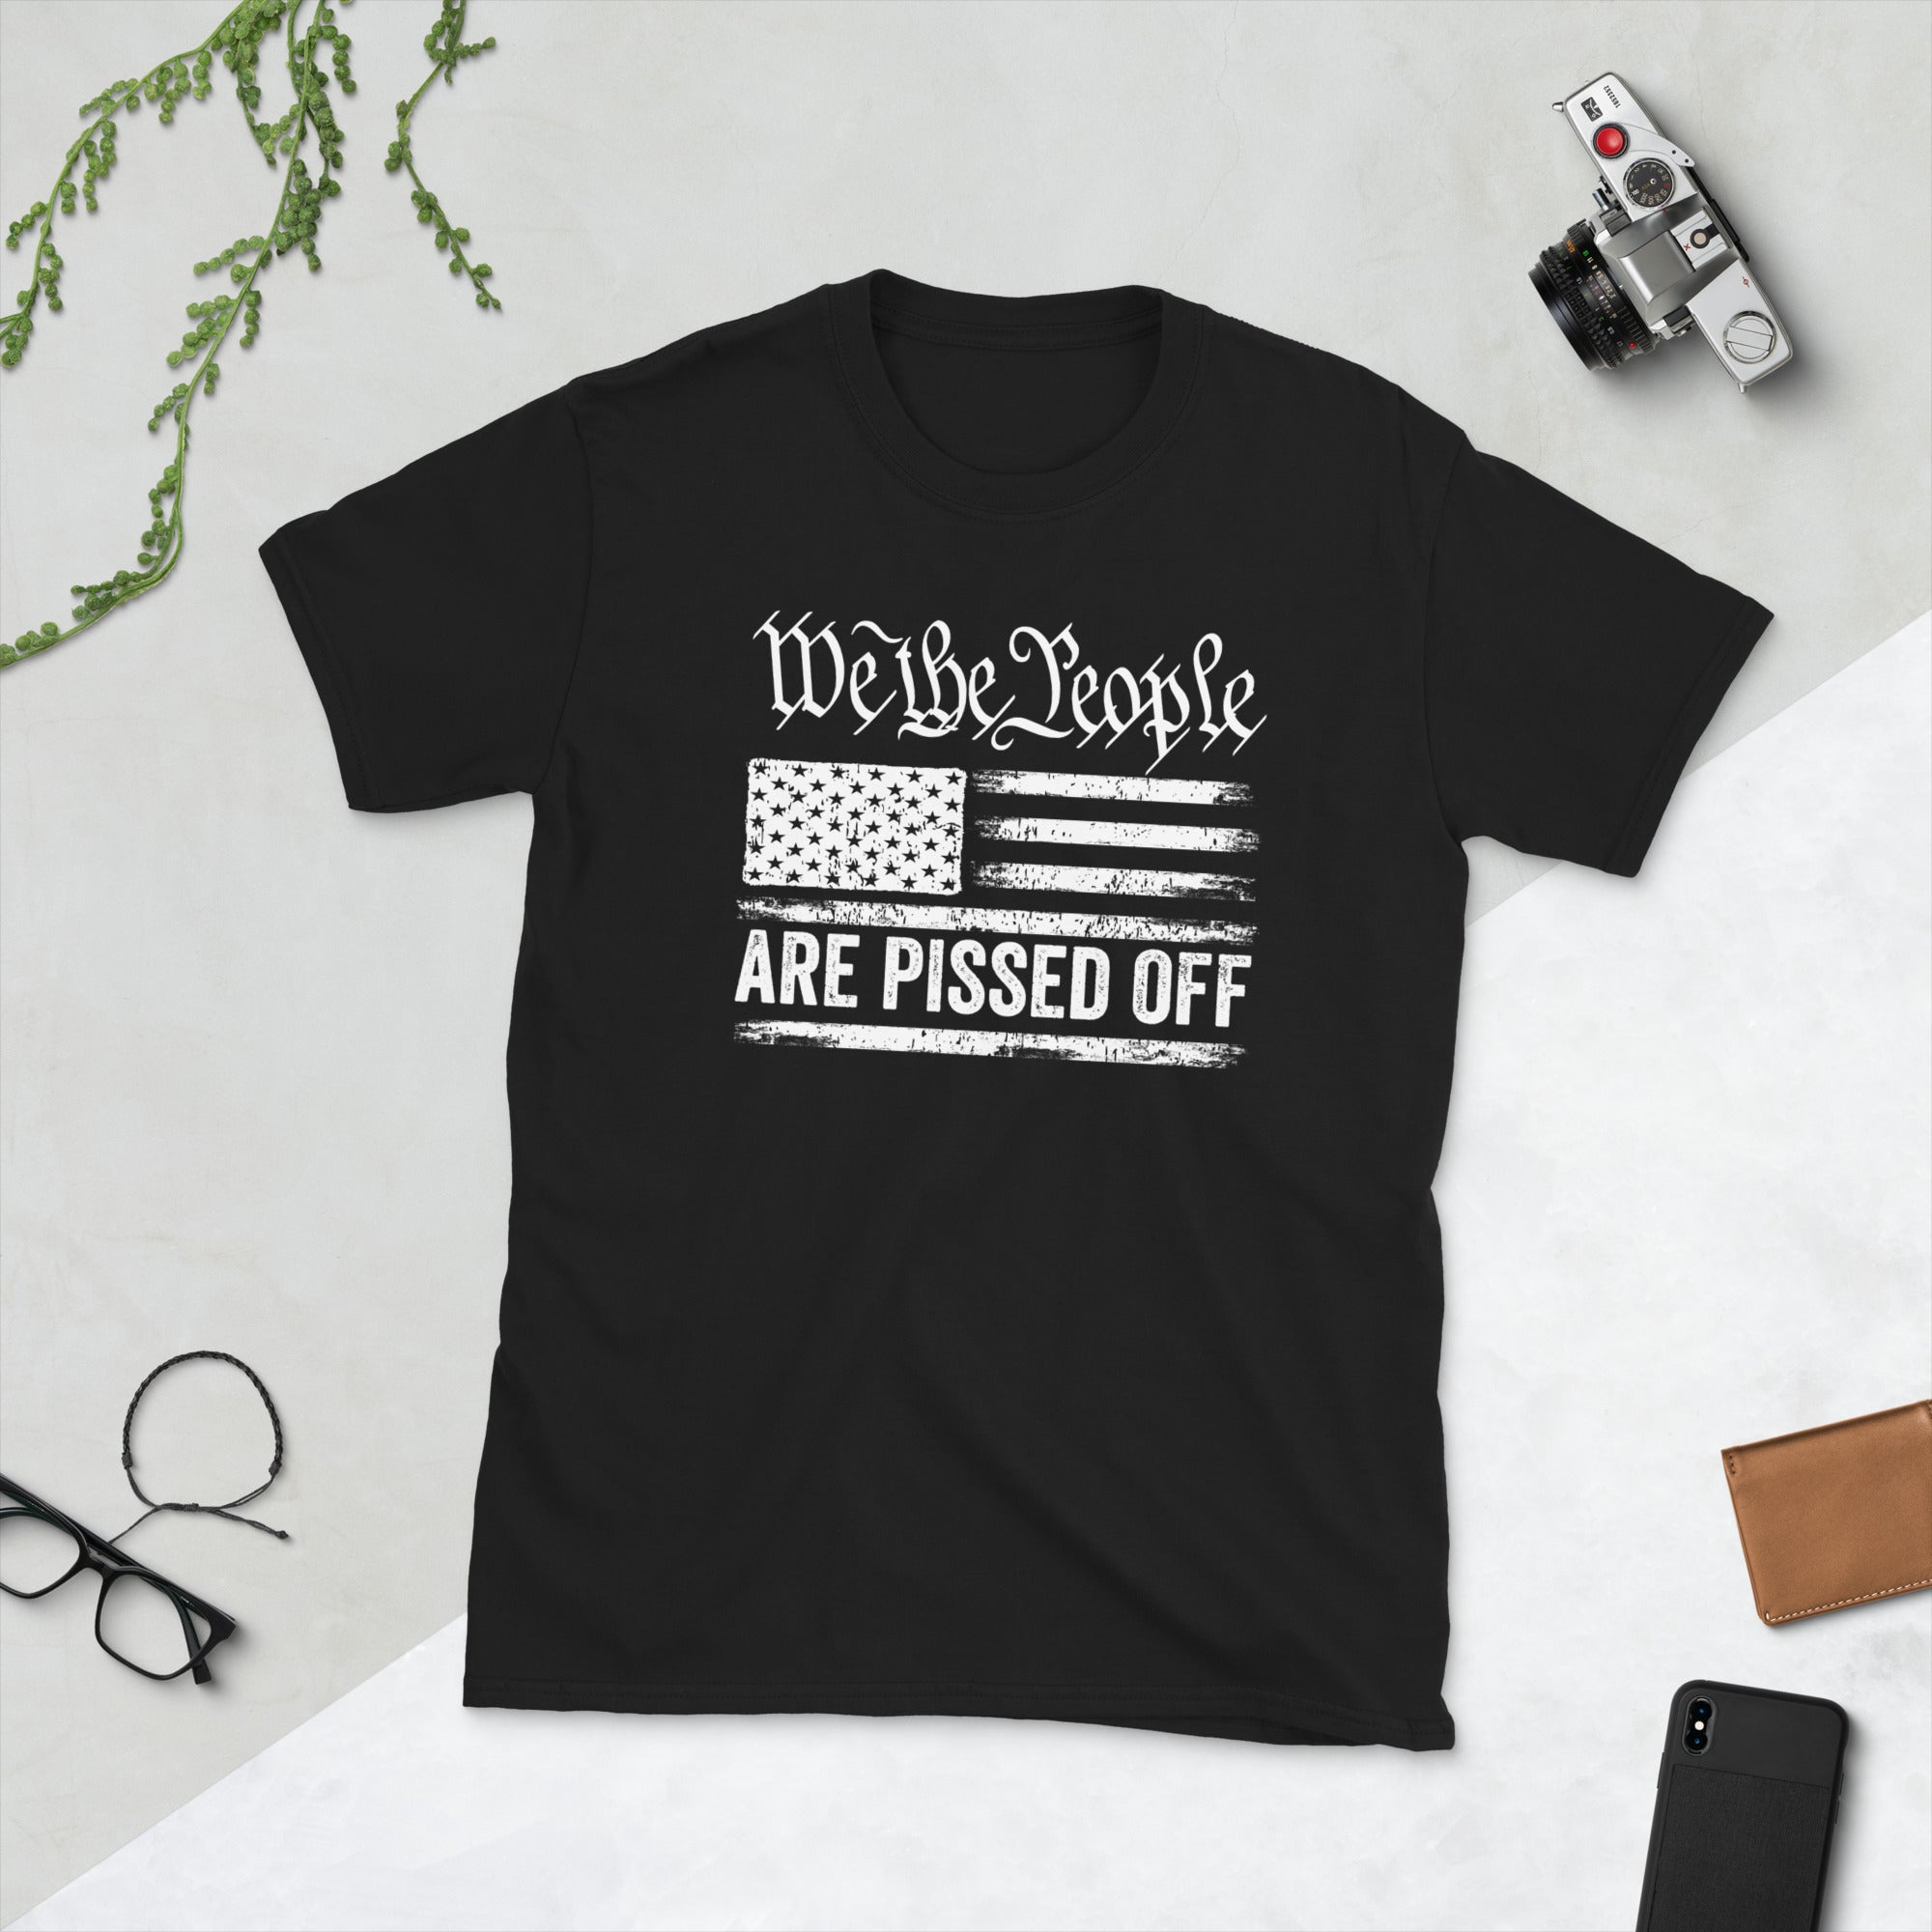 We the People are Pissed off Shirt, 2nd Amendment, American Pride, 1776 TShirt, USA Flag Shirt, American Patriot, We The People 1776 - Madeinsea©